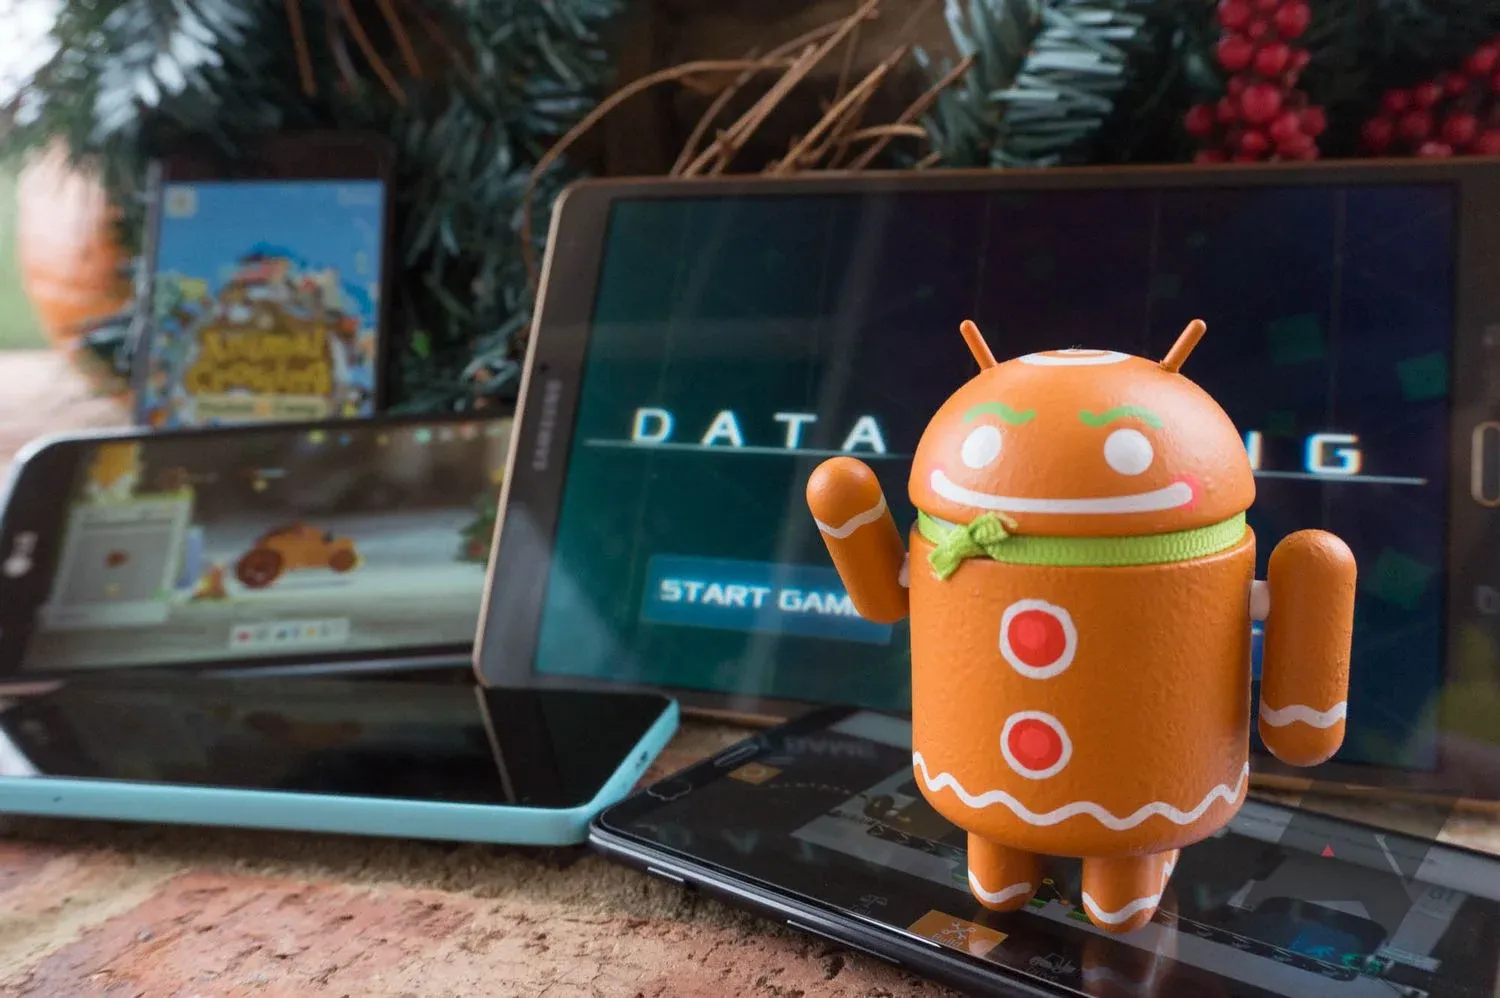 20 of the best Android games released in 2022 for your new phone, tablet, or Chromebook